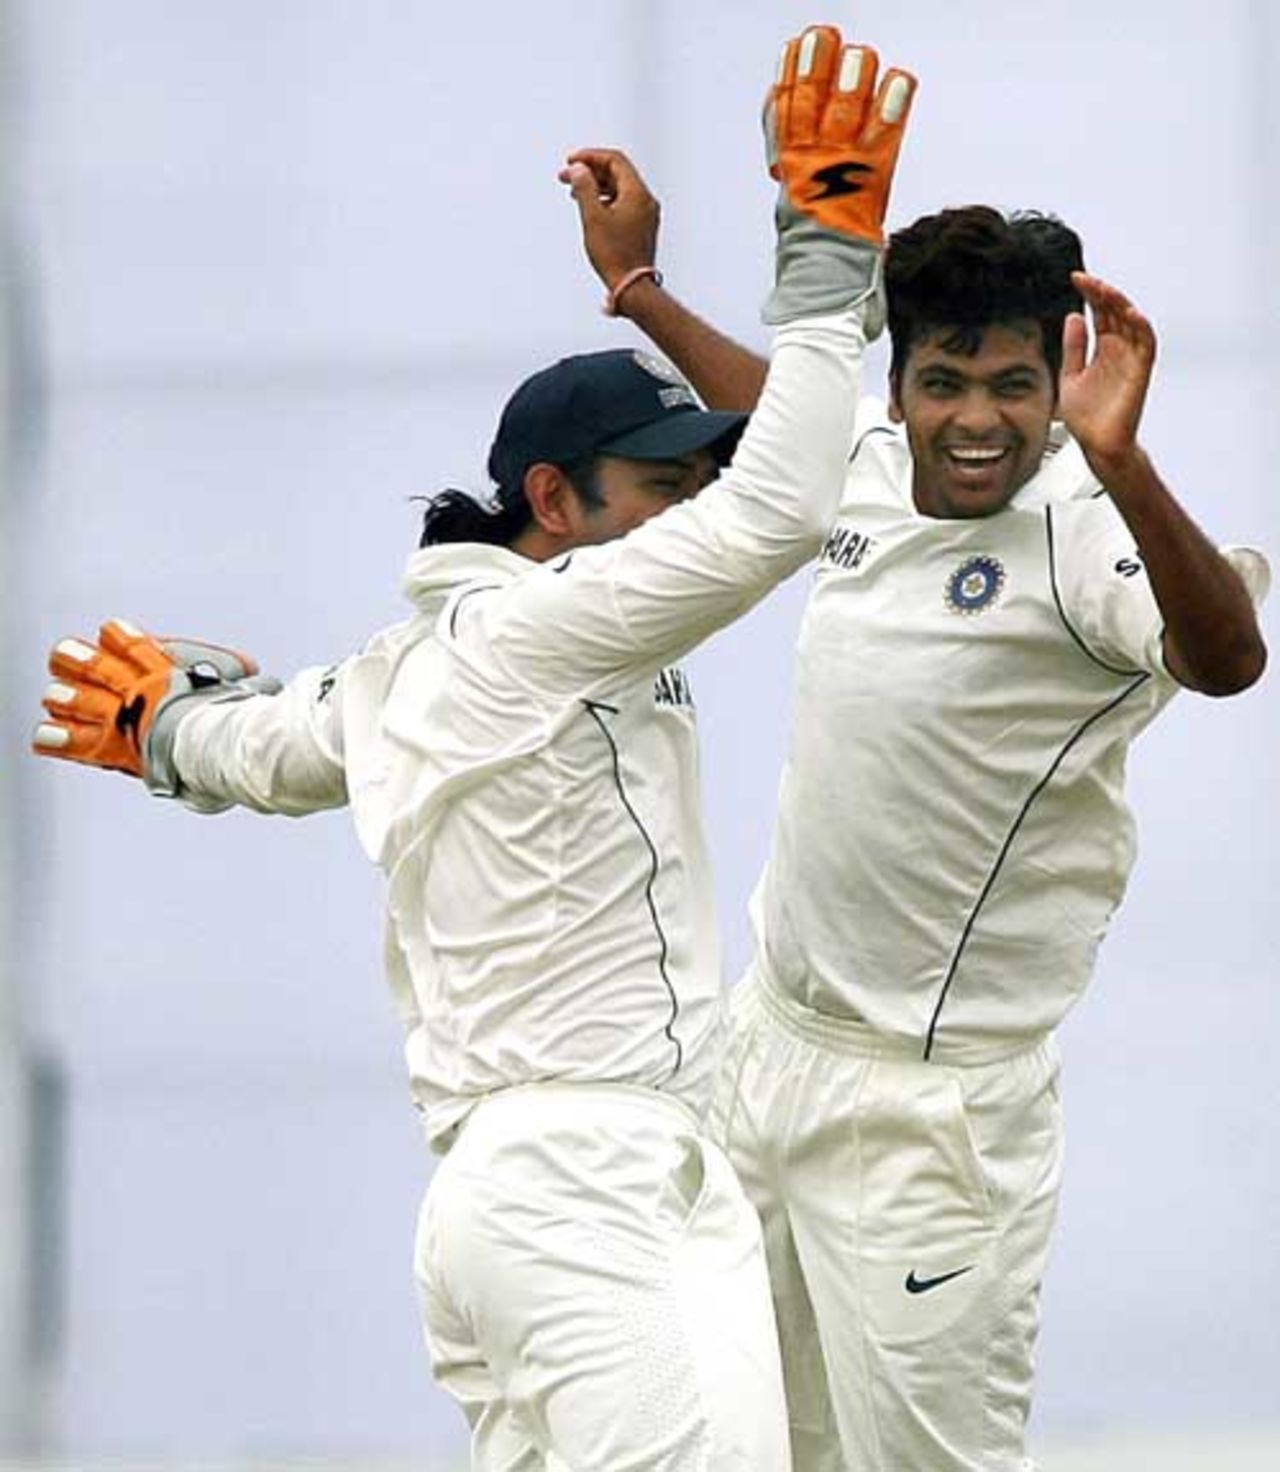 Rudra Pratap Singh and wicket keeper Mahender Singh Dhoni celebrate the dismissal of Shahriar Nafees,  Bangladesh v India, 1st Test, Chittagong, 5th day 